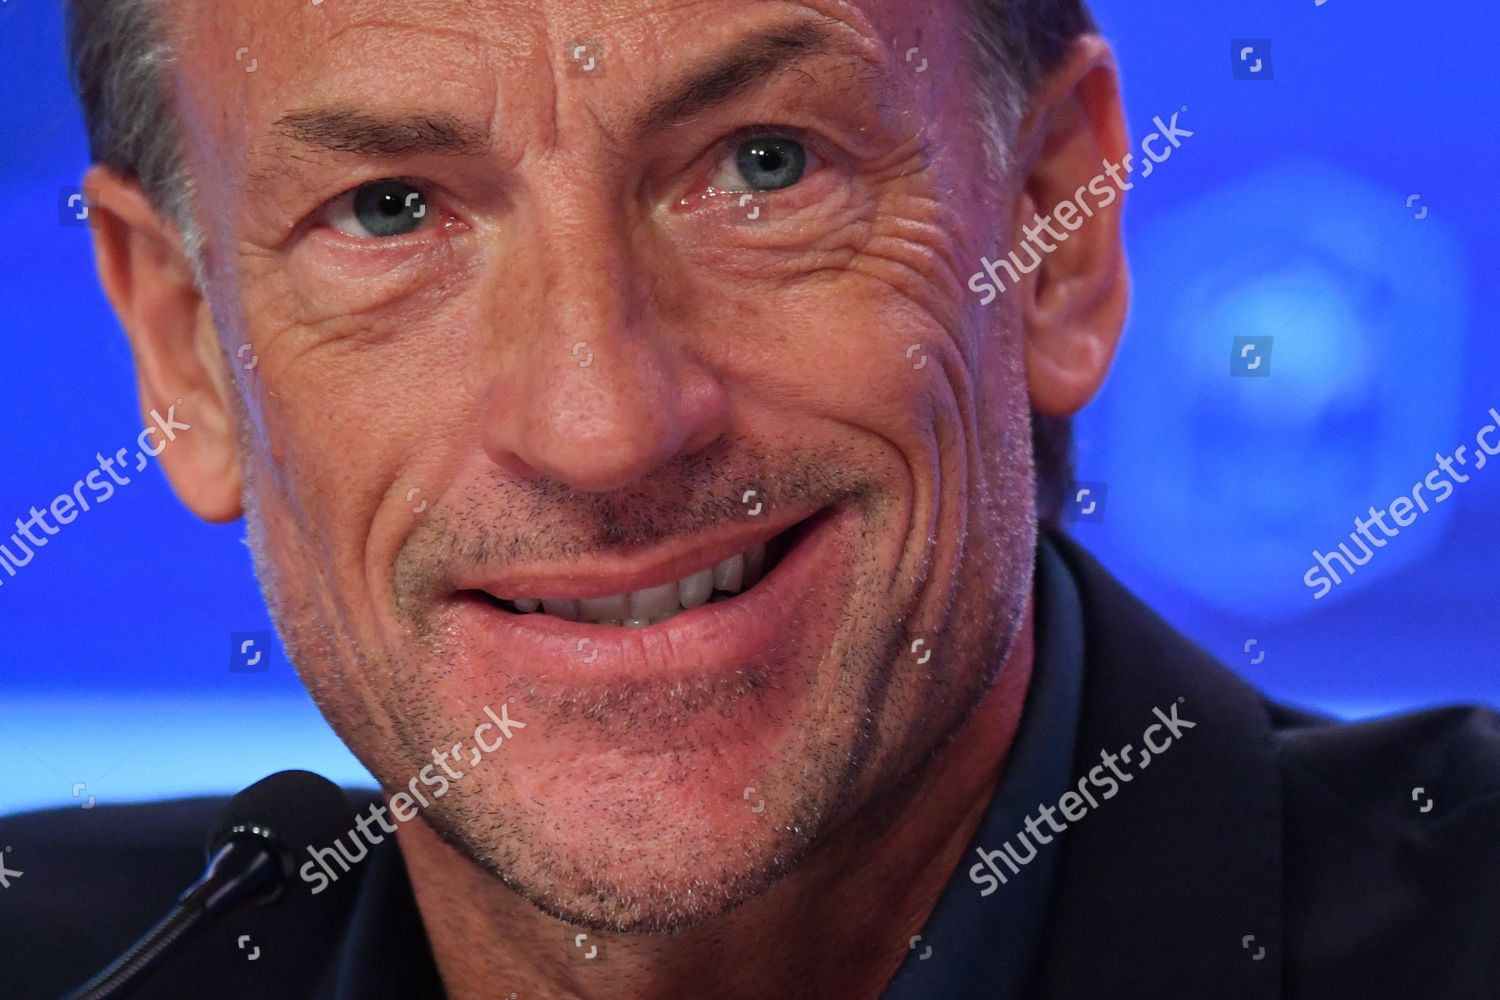 Herve Renard During His First Press Editorial Stock Photo - Stock Image